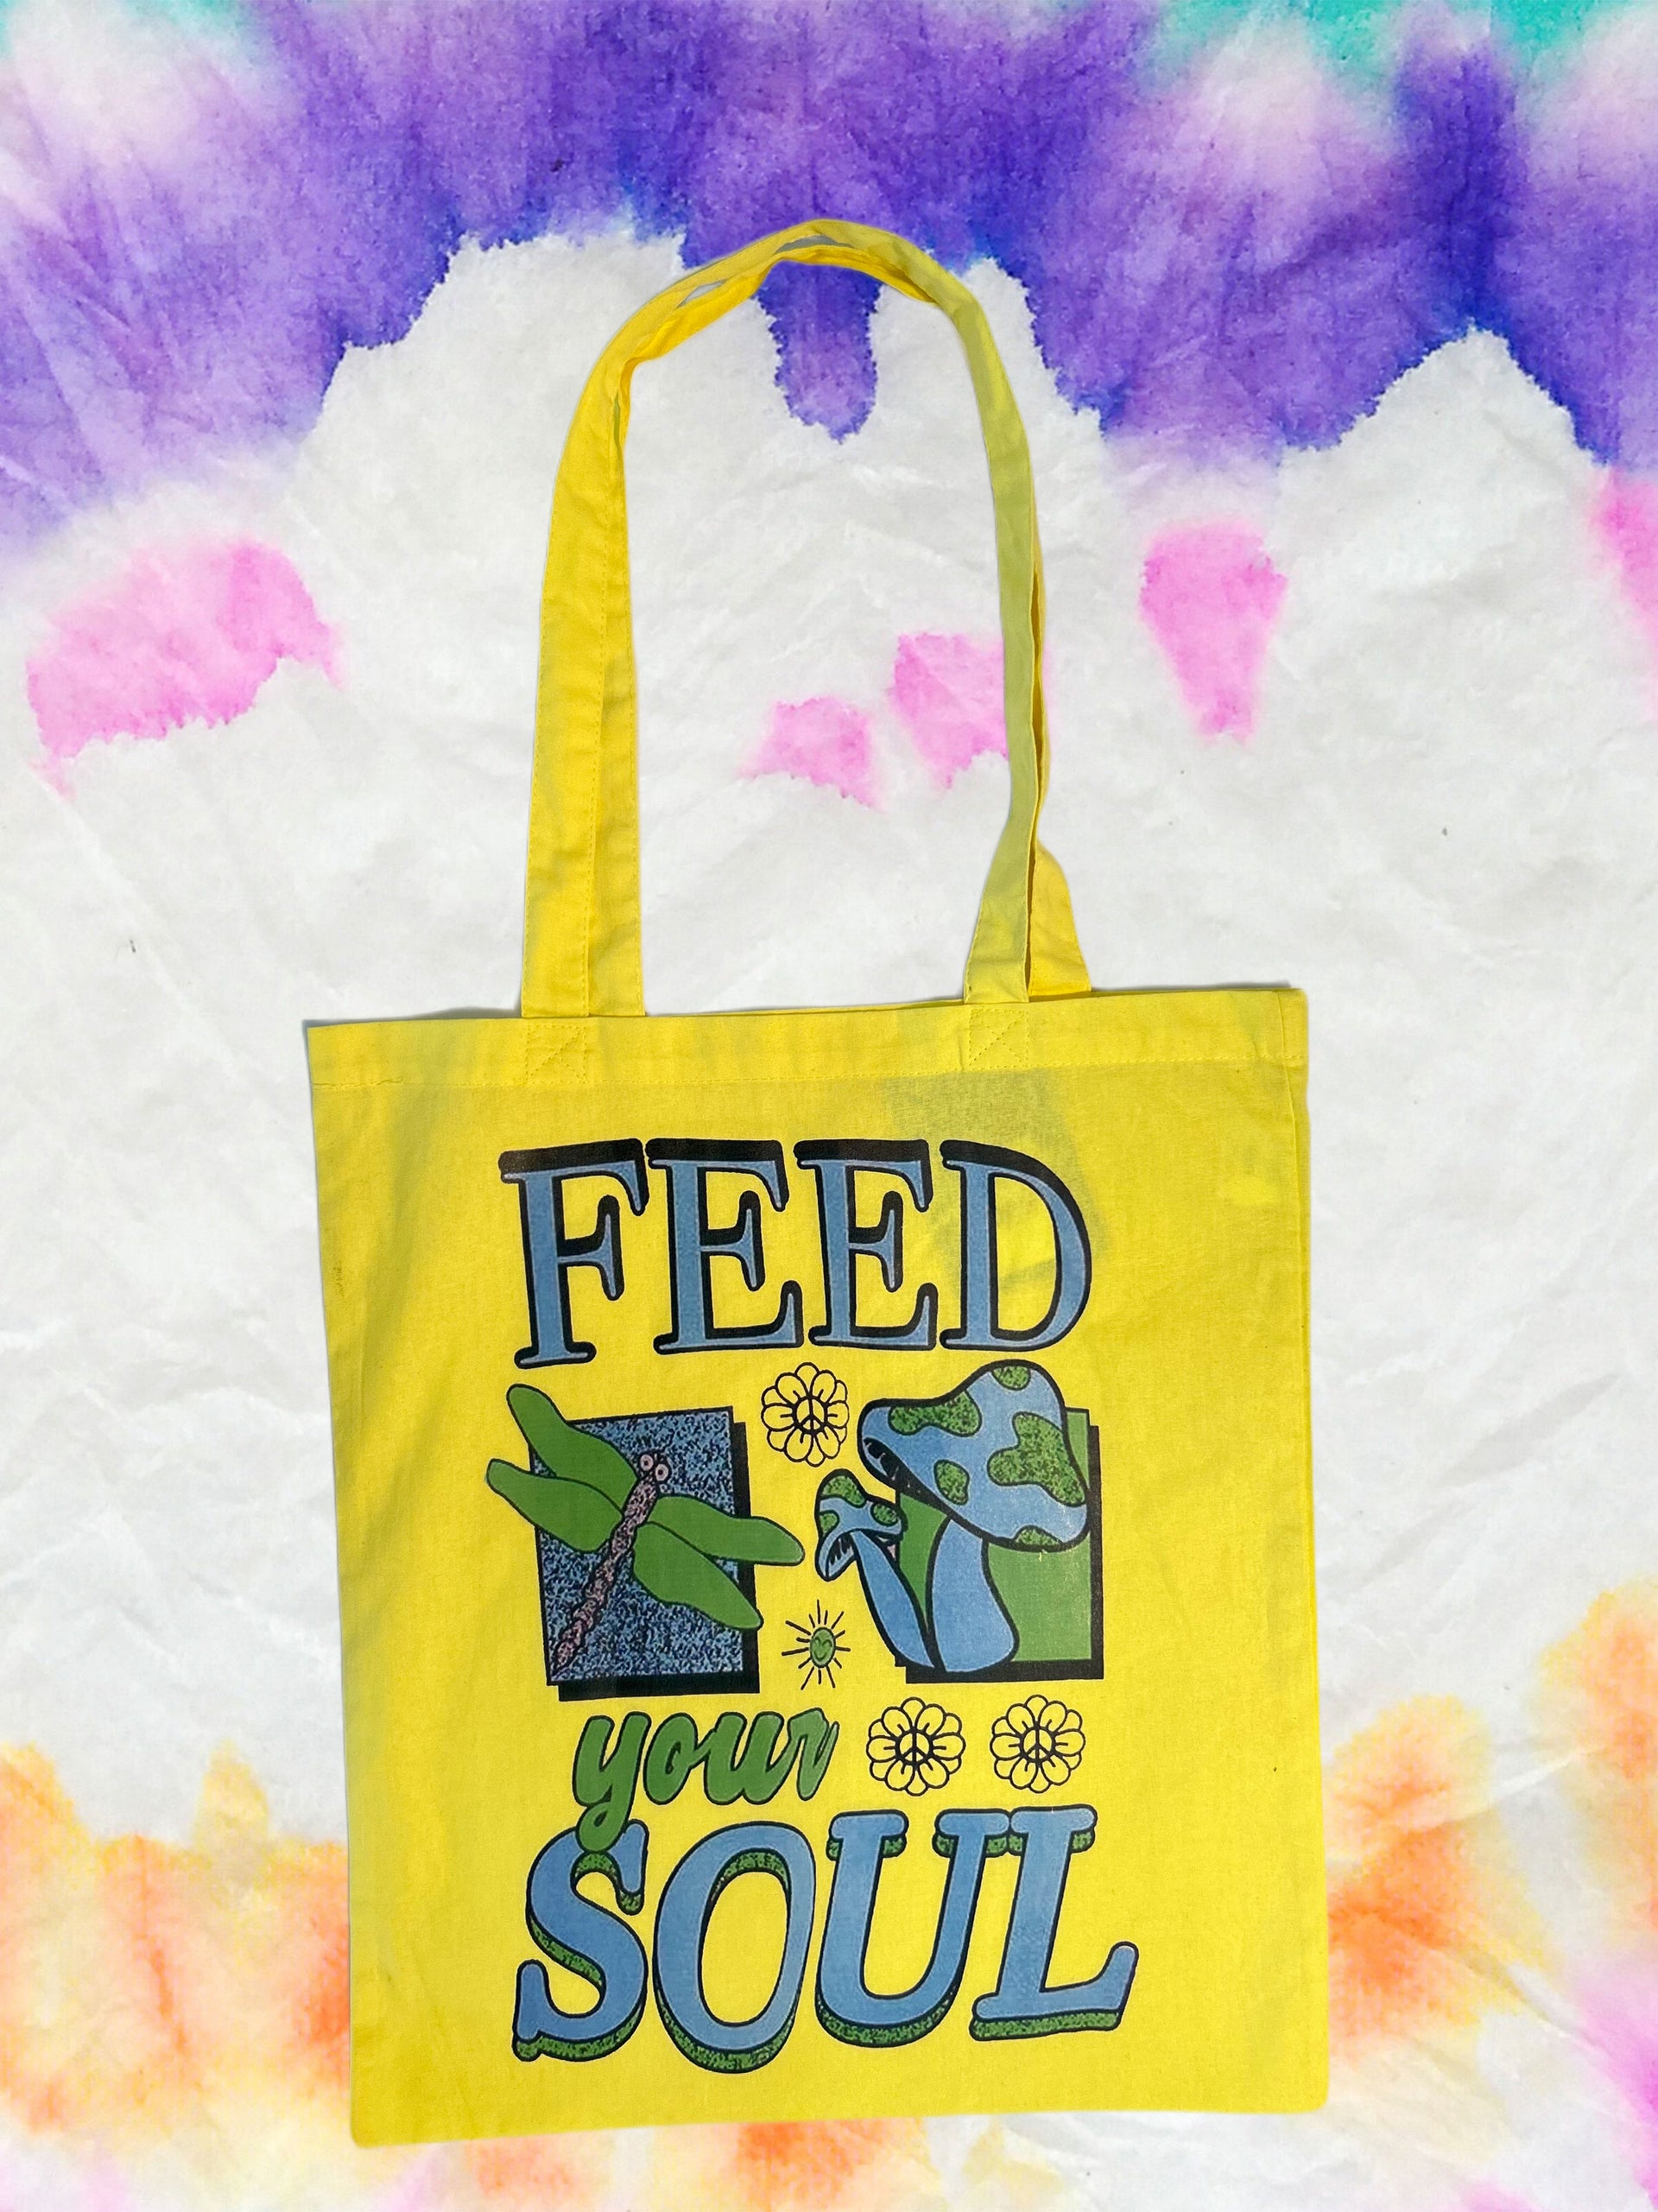 Custom nation tote-feed your soul(yellow)